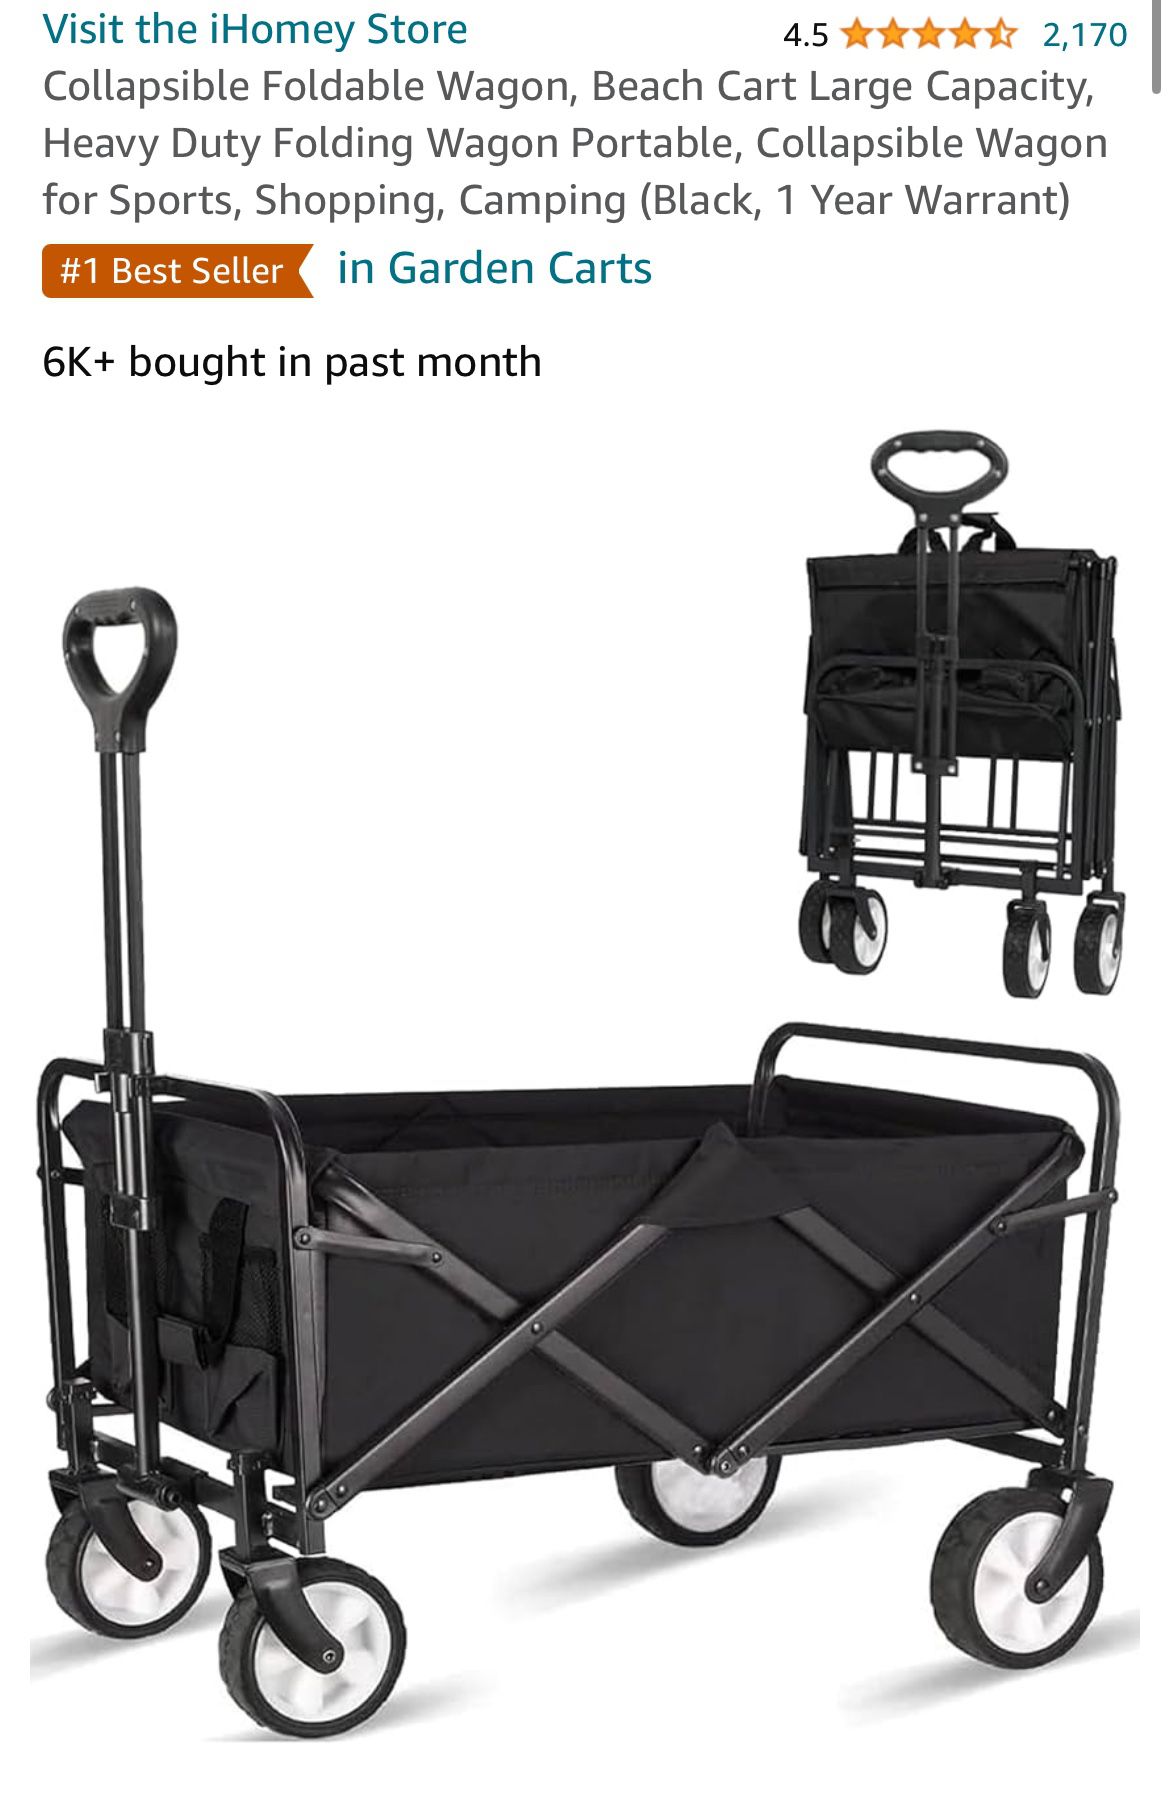 Collapsible Foldable Wagon